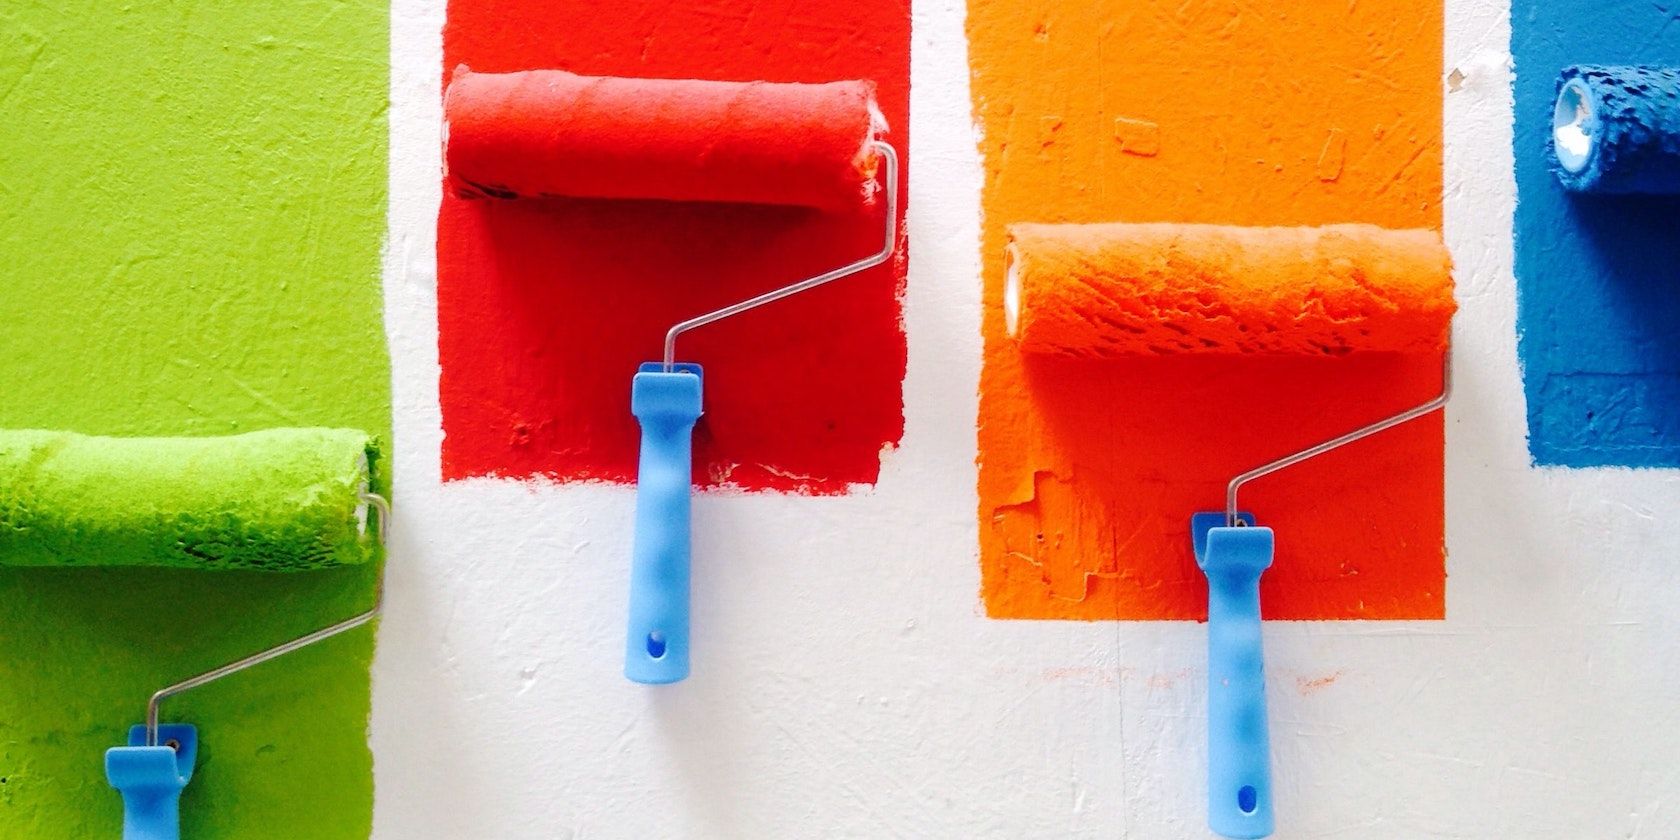 Four rollers paint colorful blocks onto a wall in green, red, orange, and blue